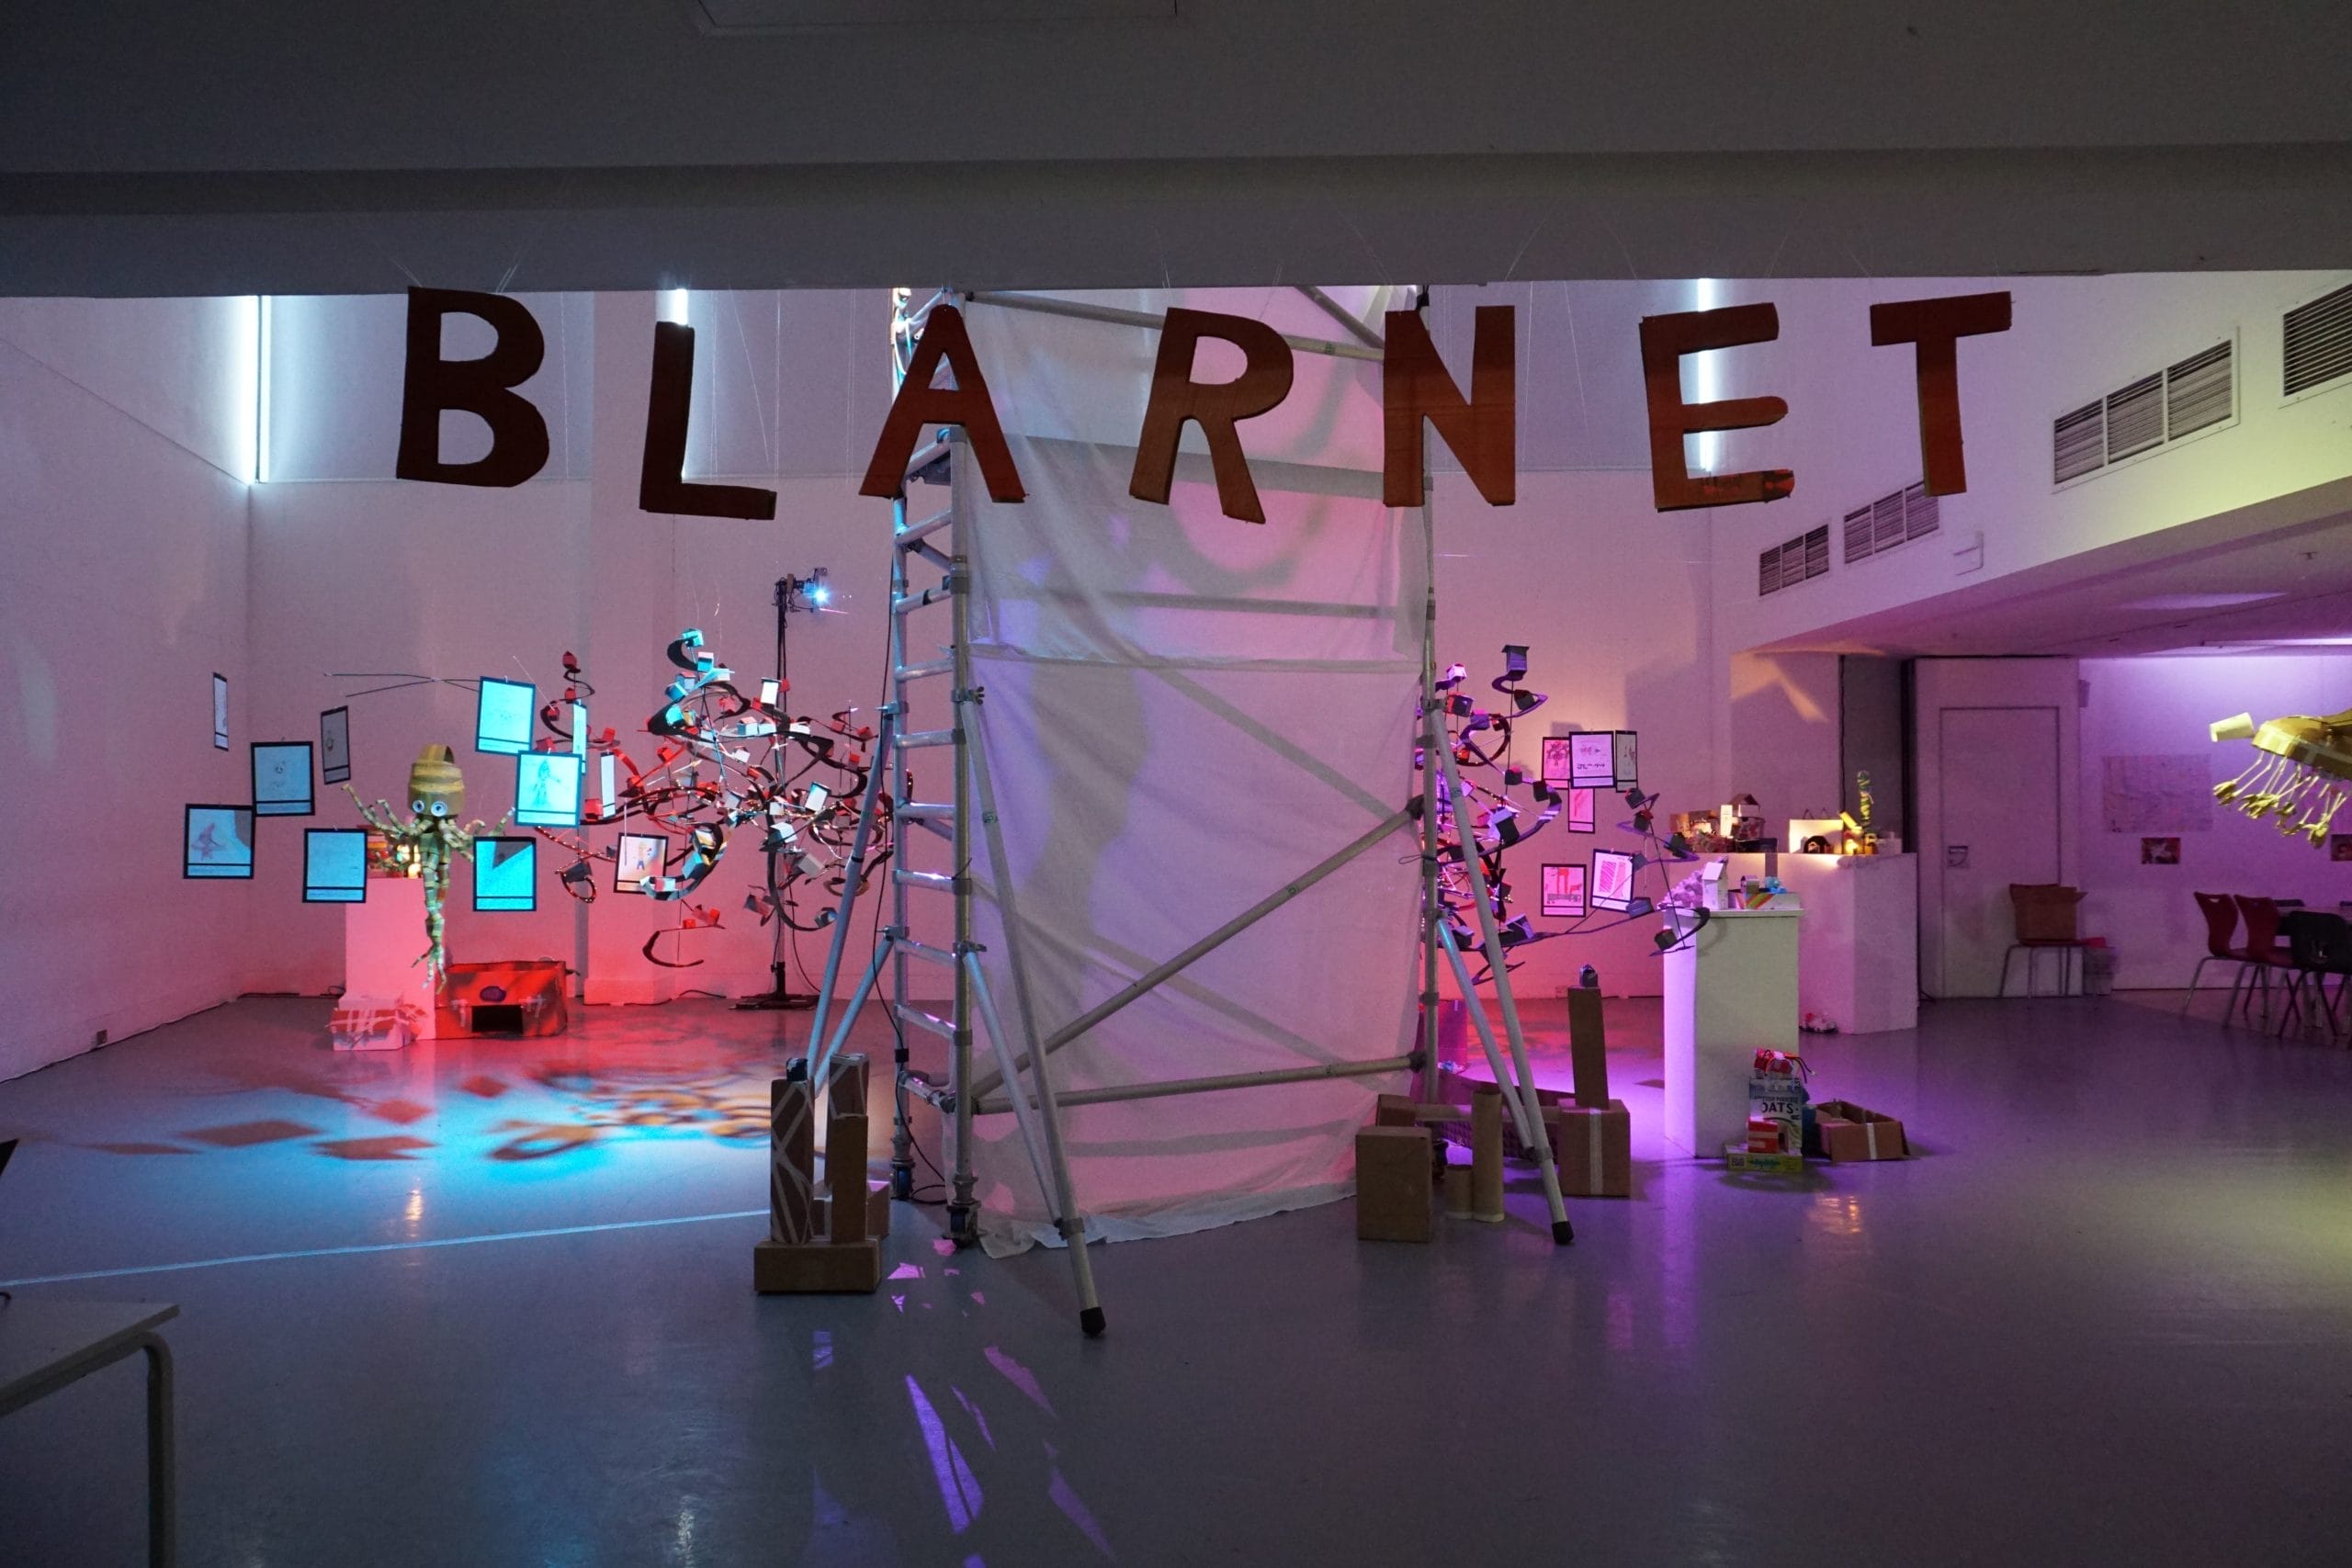 Wide shot of the exhibition space, where a futuristic world has been crafted out of cardboard and sustainable materials. Hung from the ceiling in cardboard letters is the word BLARNET.